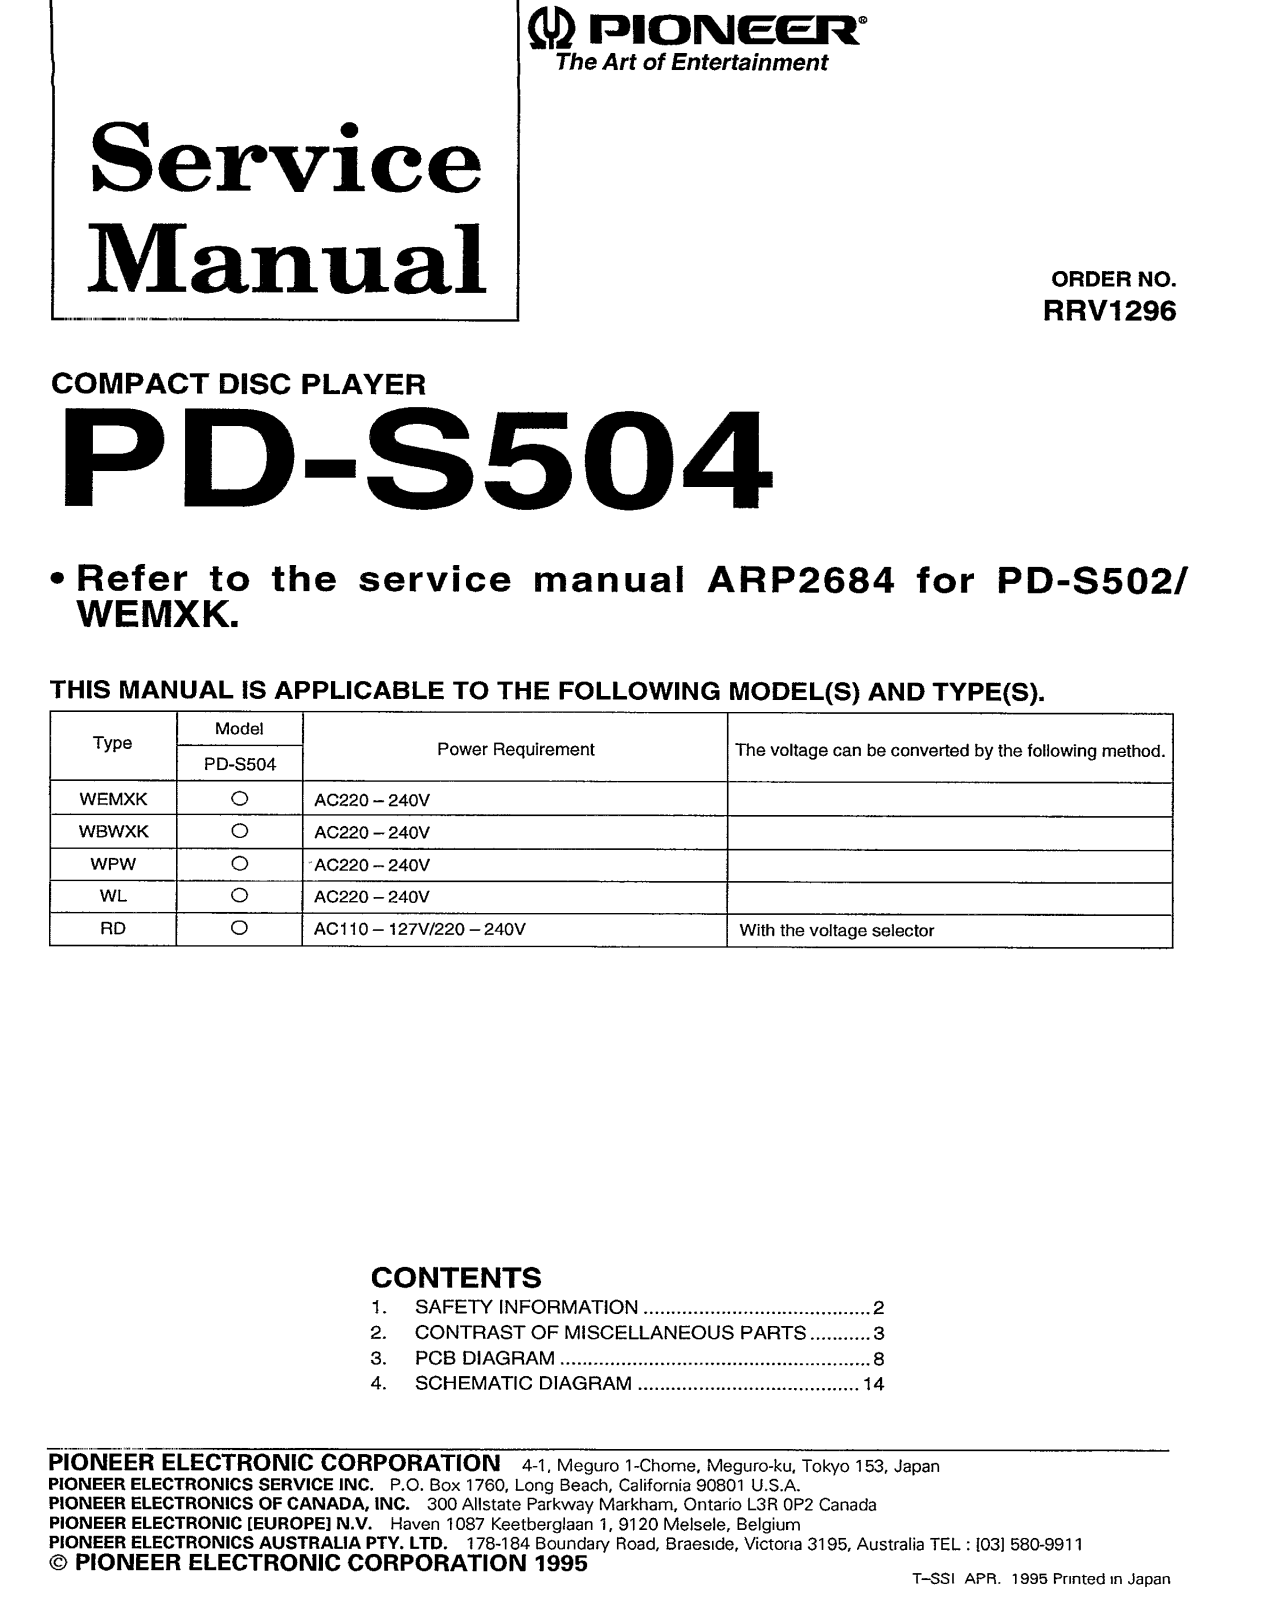 Pioneer PD-S504 Service Manual